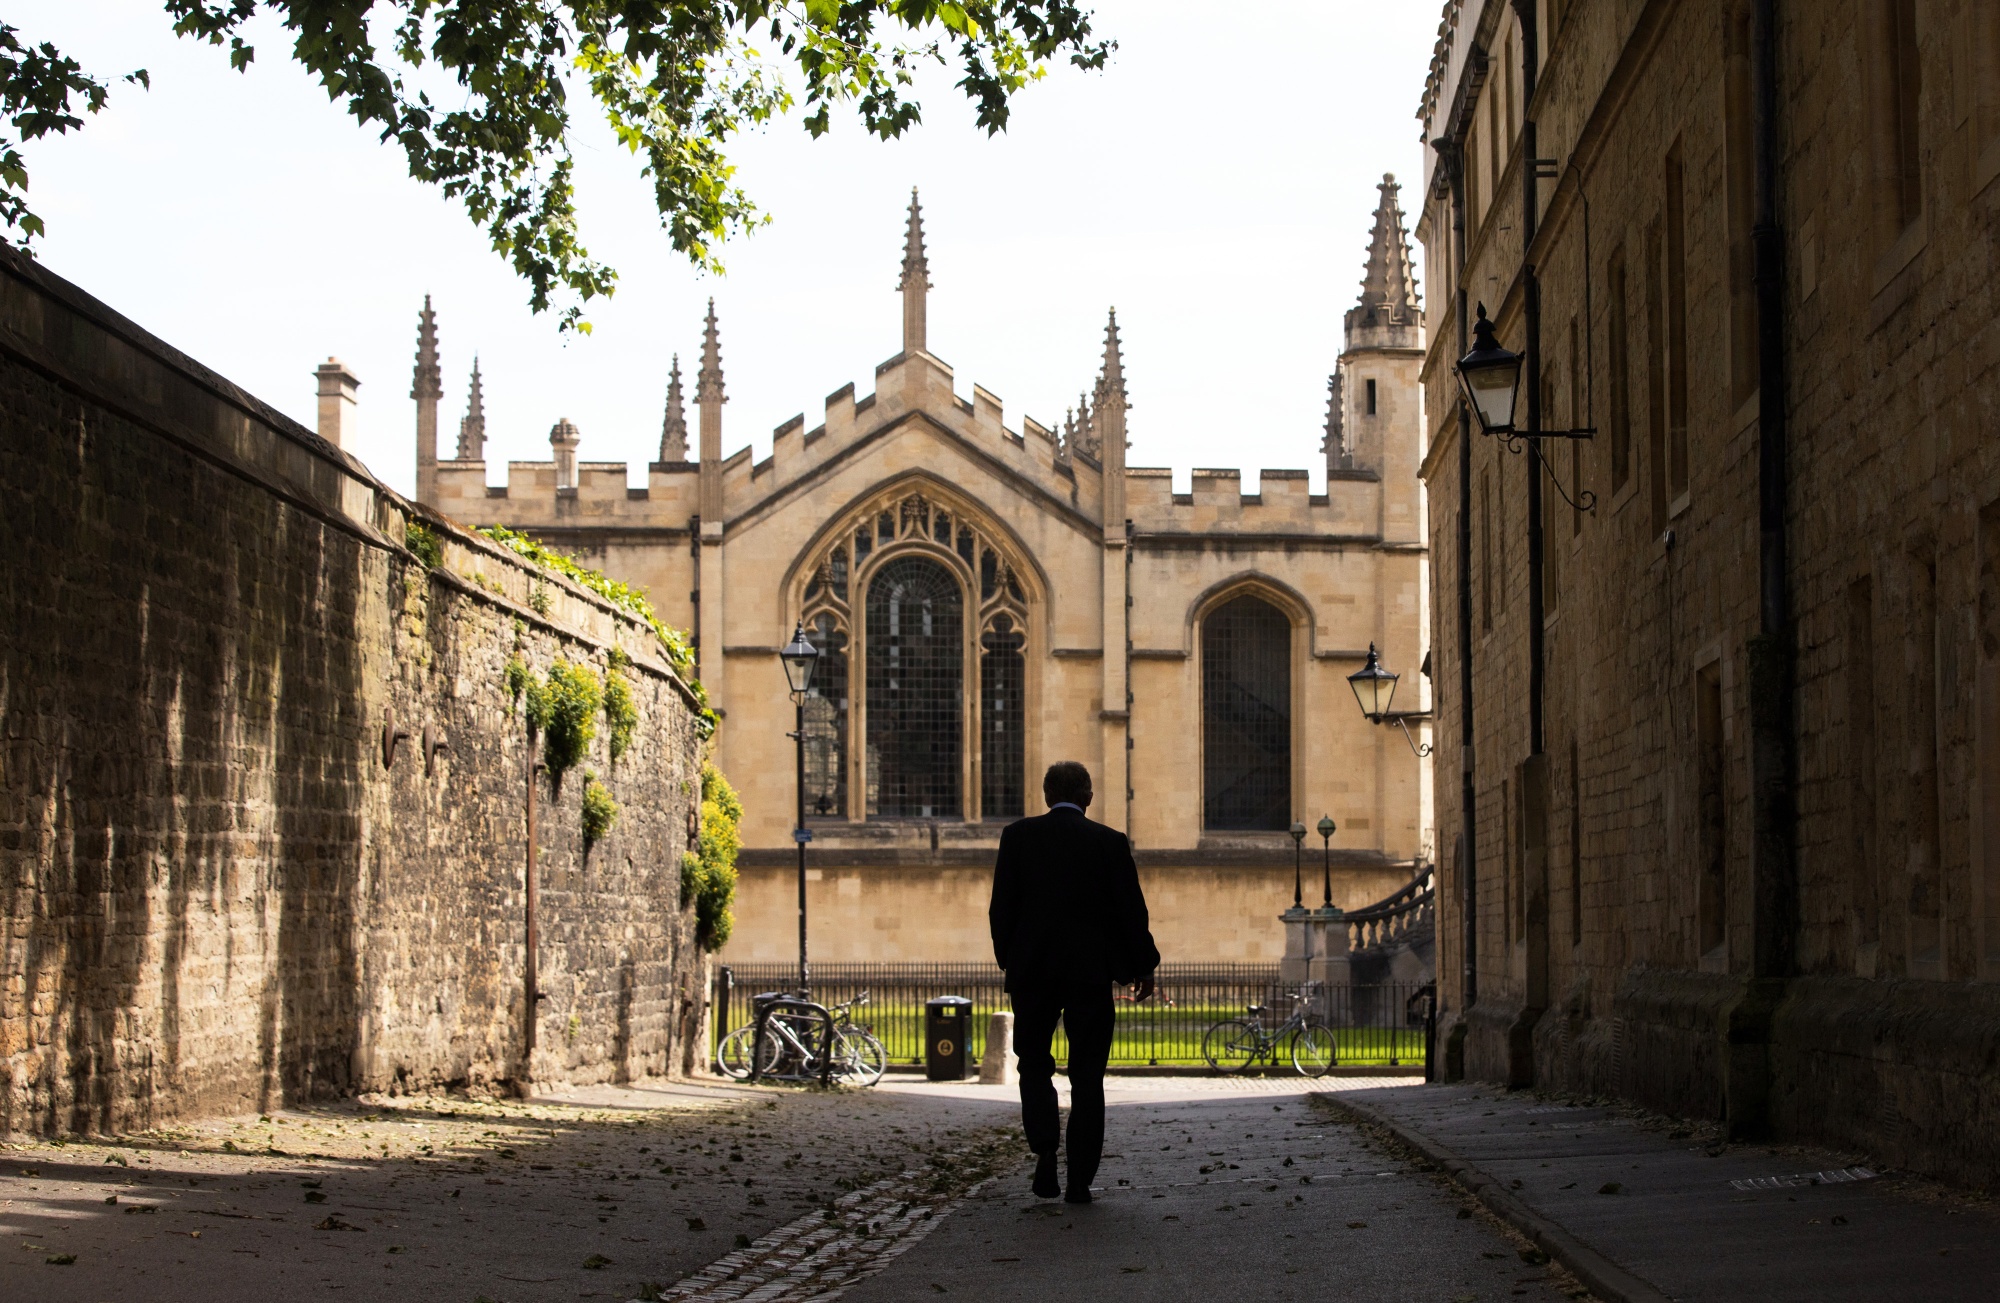 All Soul's College, part of Oxford University, which was placed top of the Times Higher Education World University Rankings 2023.